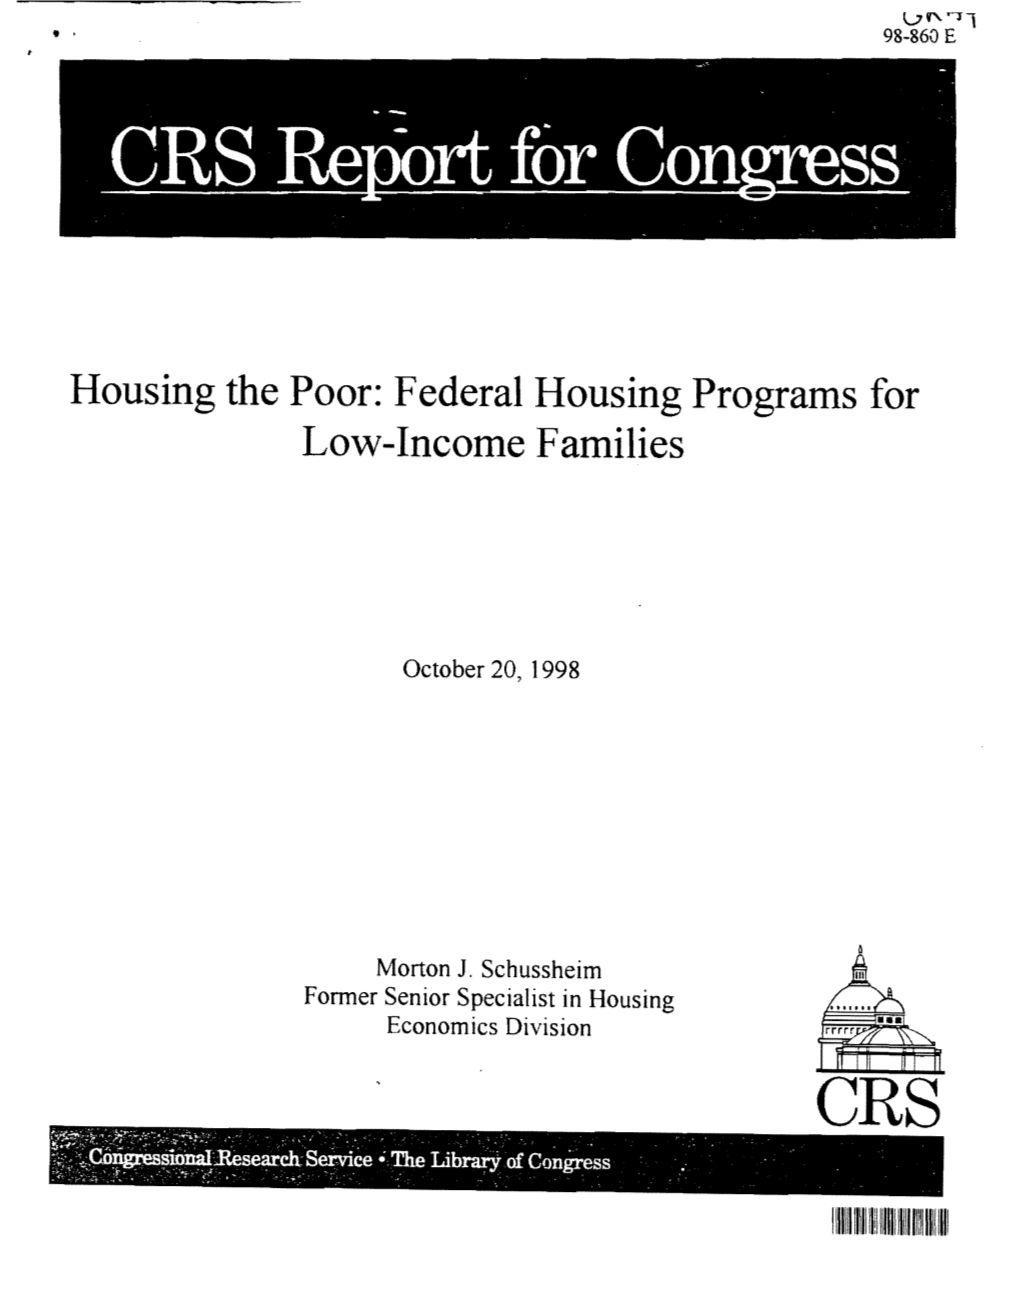 CRS Report for Congress. Housing the Poor. Federal Programs for Low